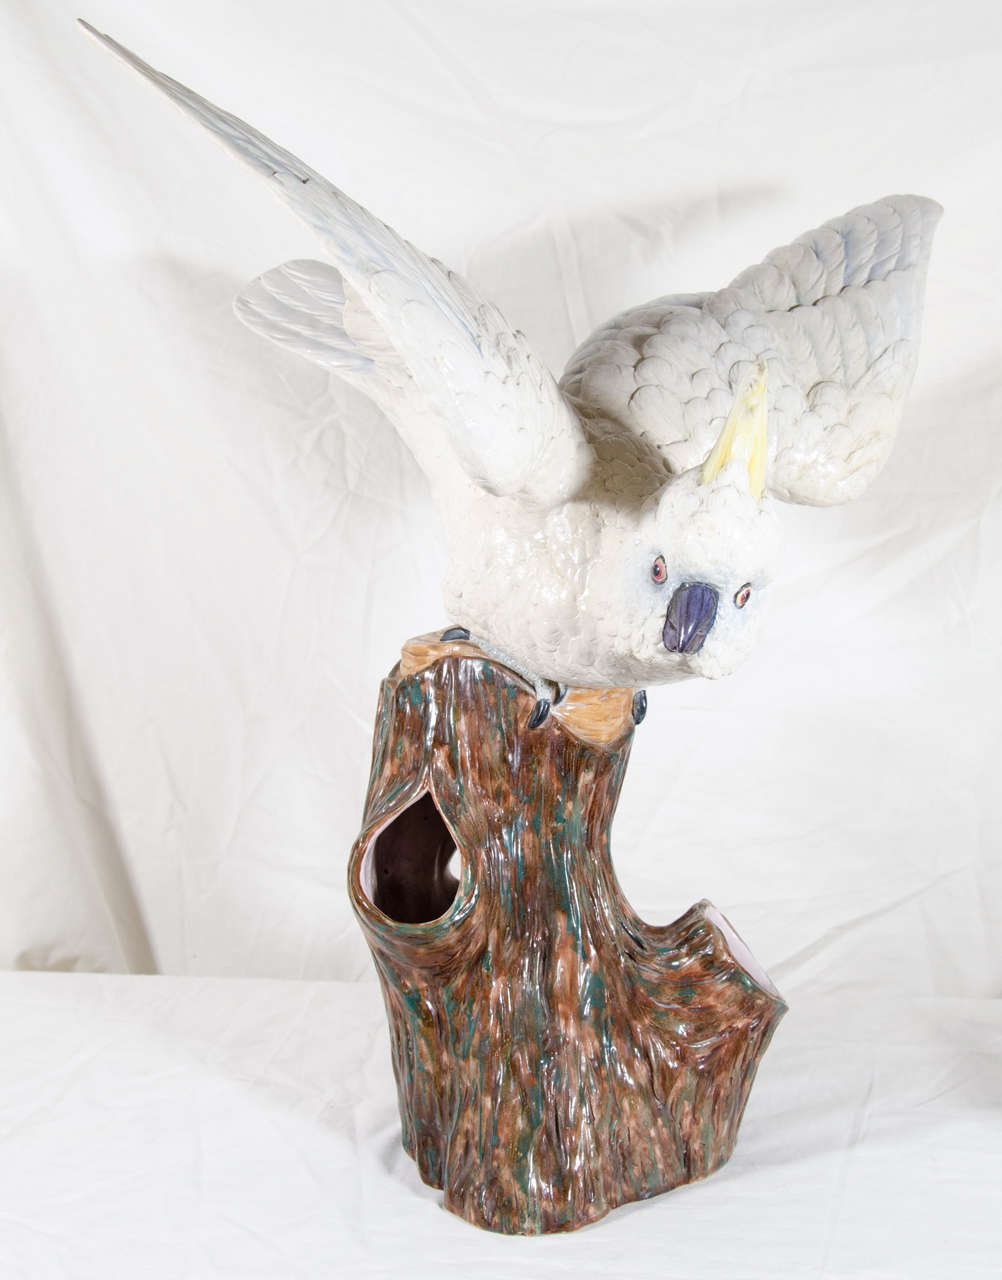 We are pleased to offer this large antique porcelain sculpture of a cockatoo made by Royal Worcester Porcelain in the last quarter of the 19th century. The sculpture is the size of a live cockatoo. Modeled as if it is about to take flight, the bird